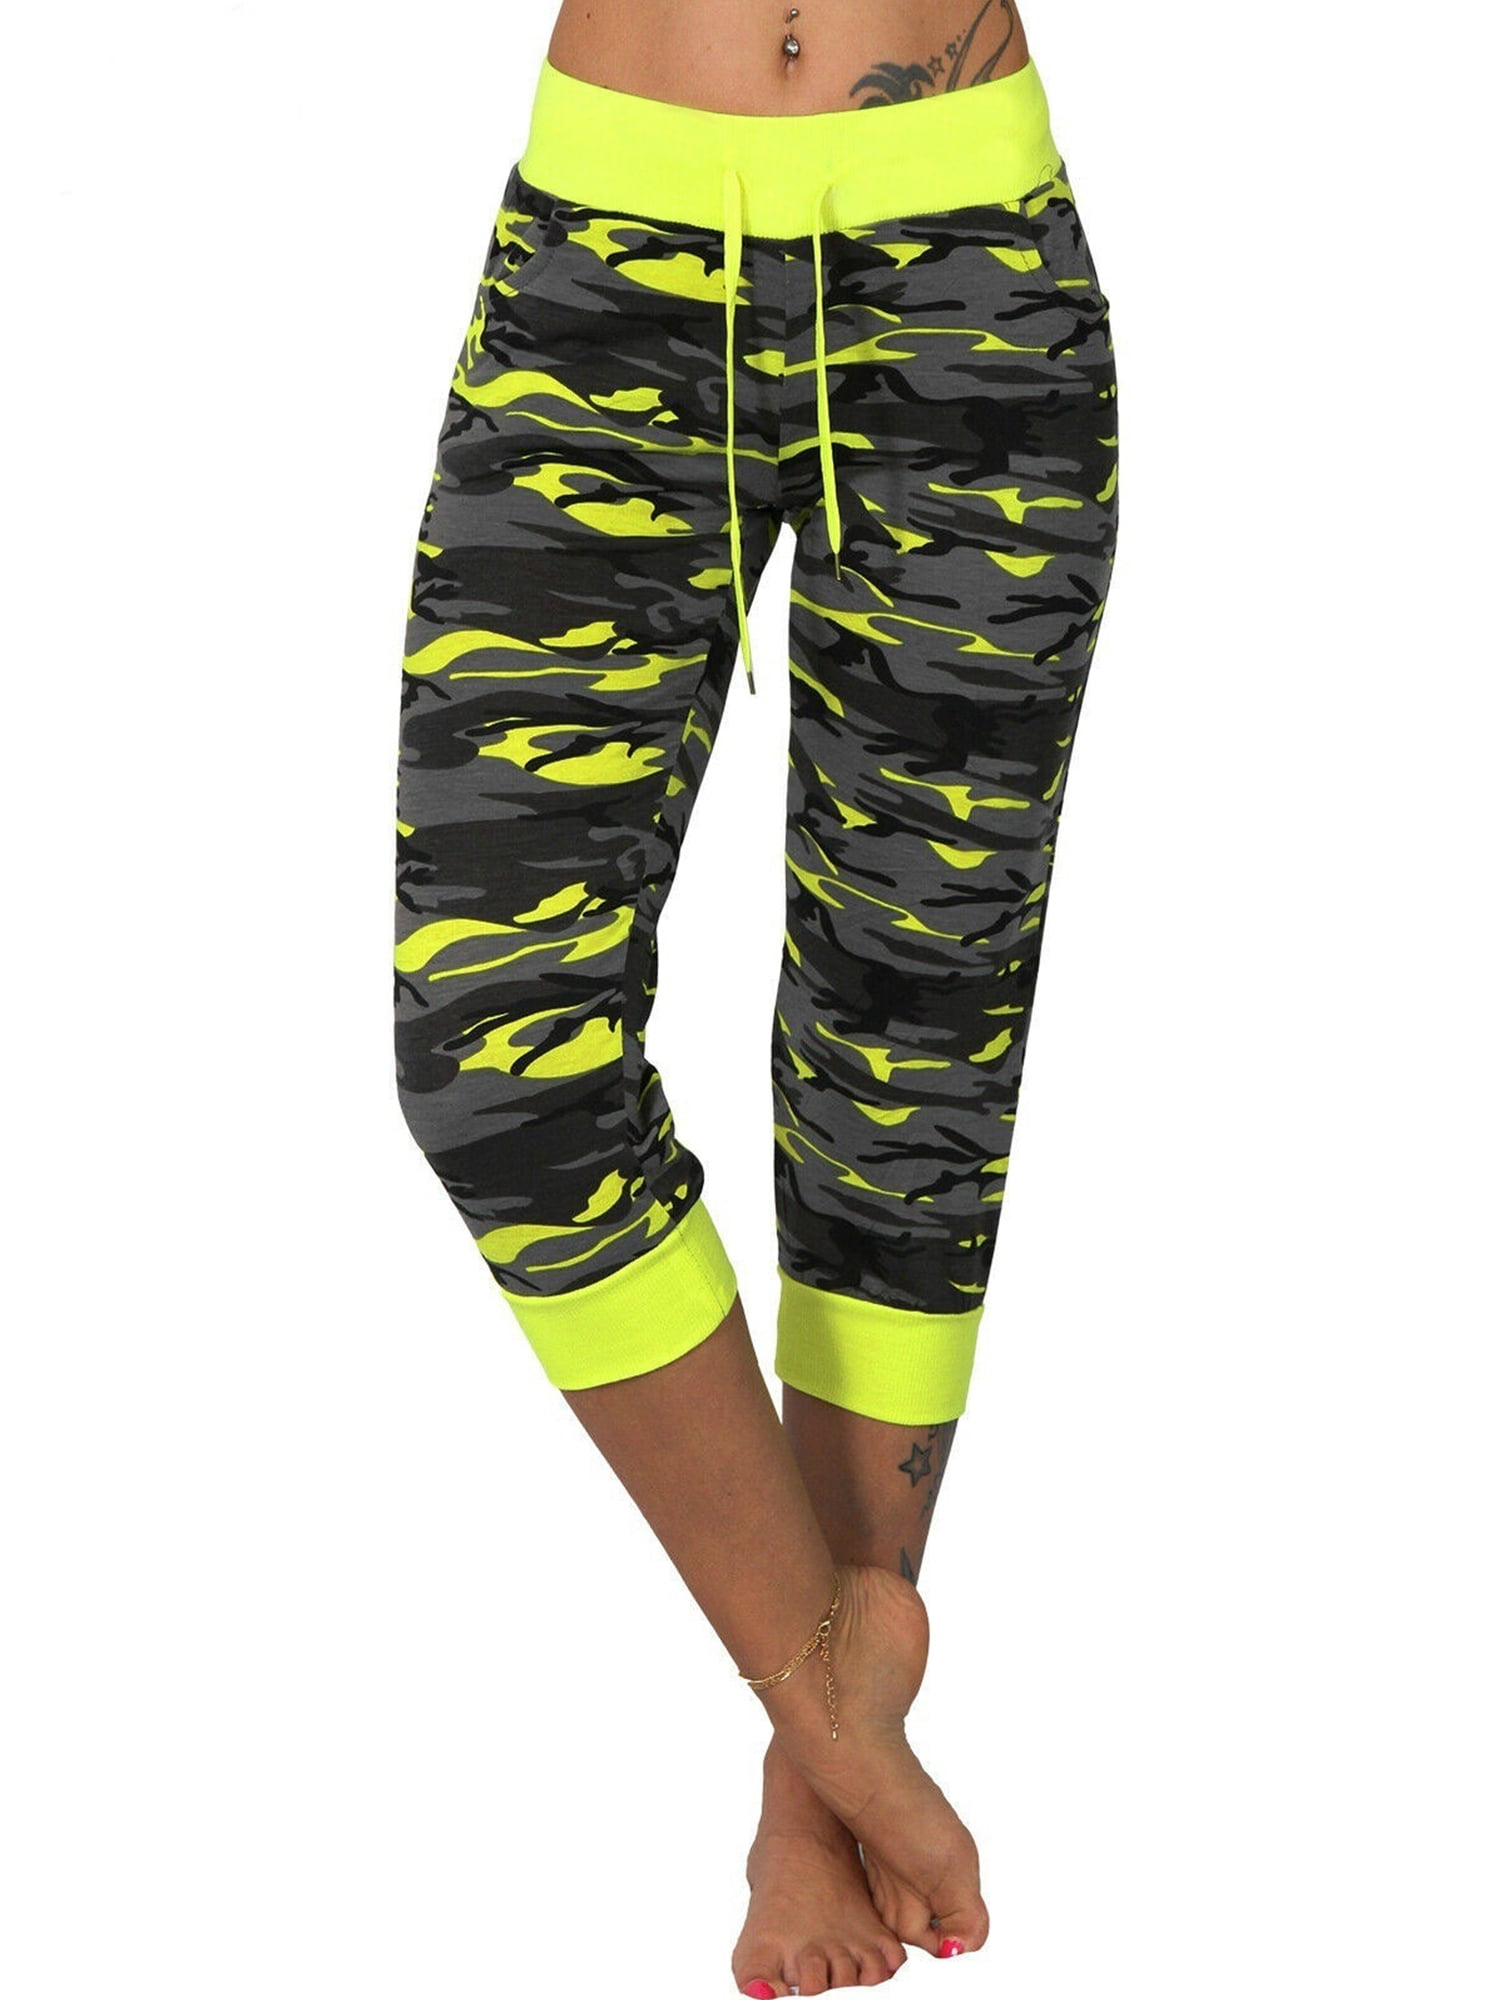 Women Oversized Camo Running Fitness Leggings Pants Skinny Crop Leg Pants  Tummy Control Pockets Jegging Capris for Ladies Active Workout Trousers 